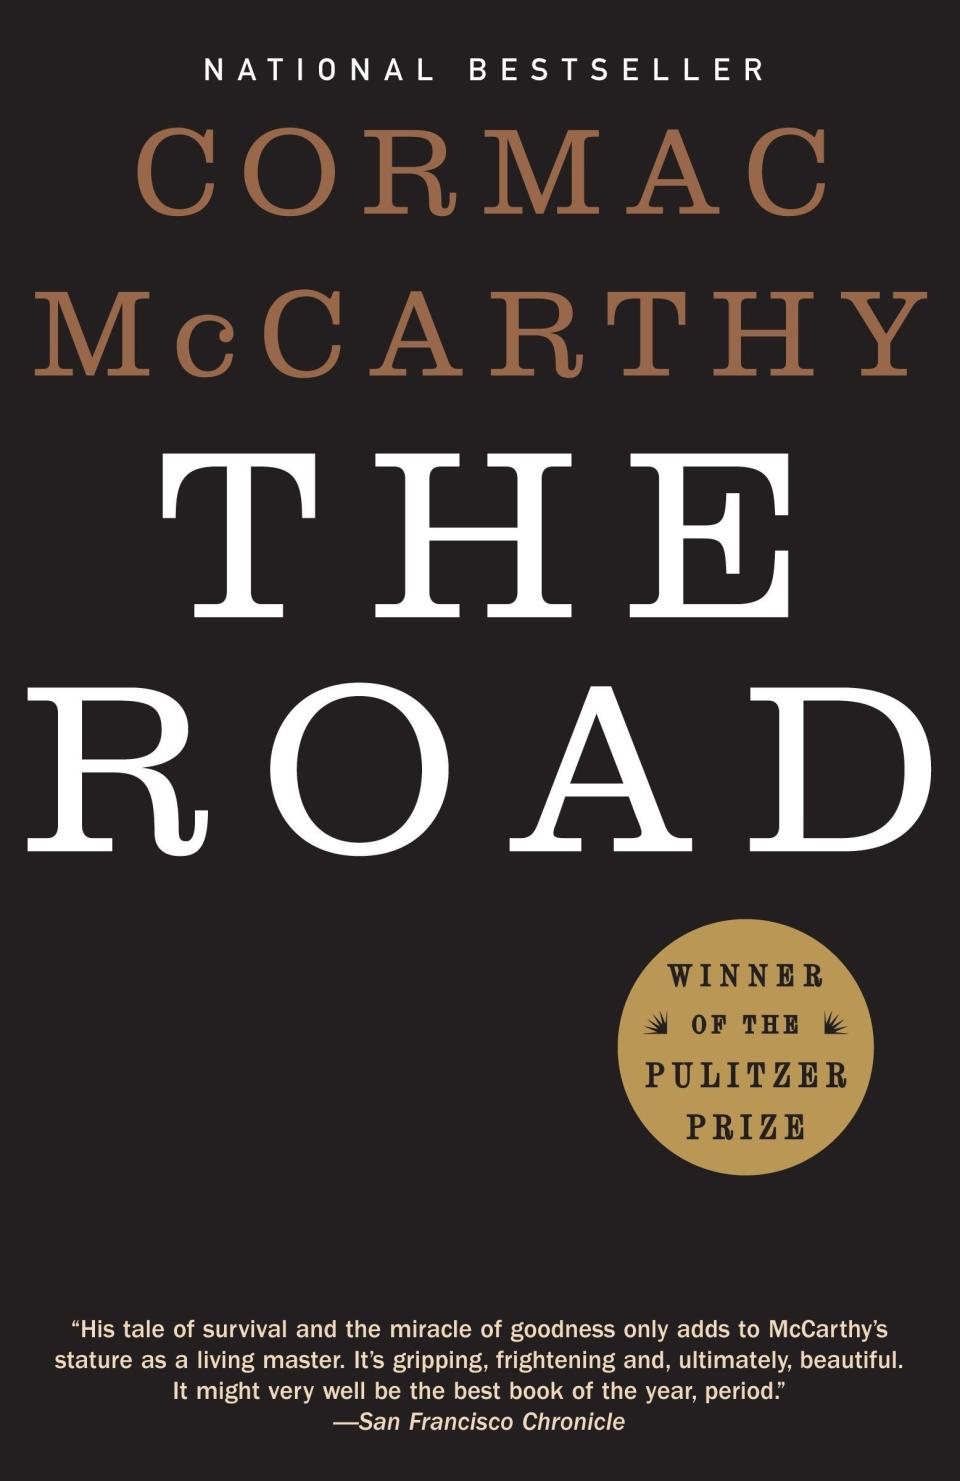 "The Road" by Cormac McCarthy